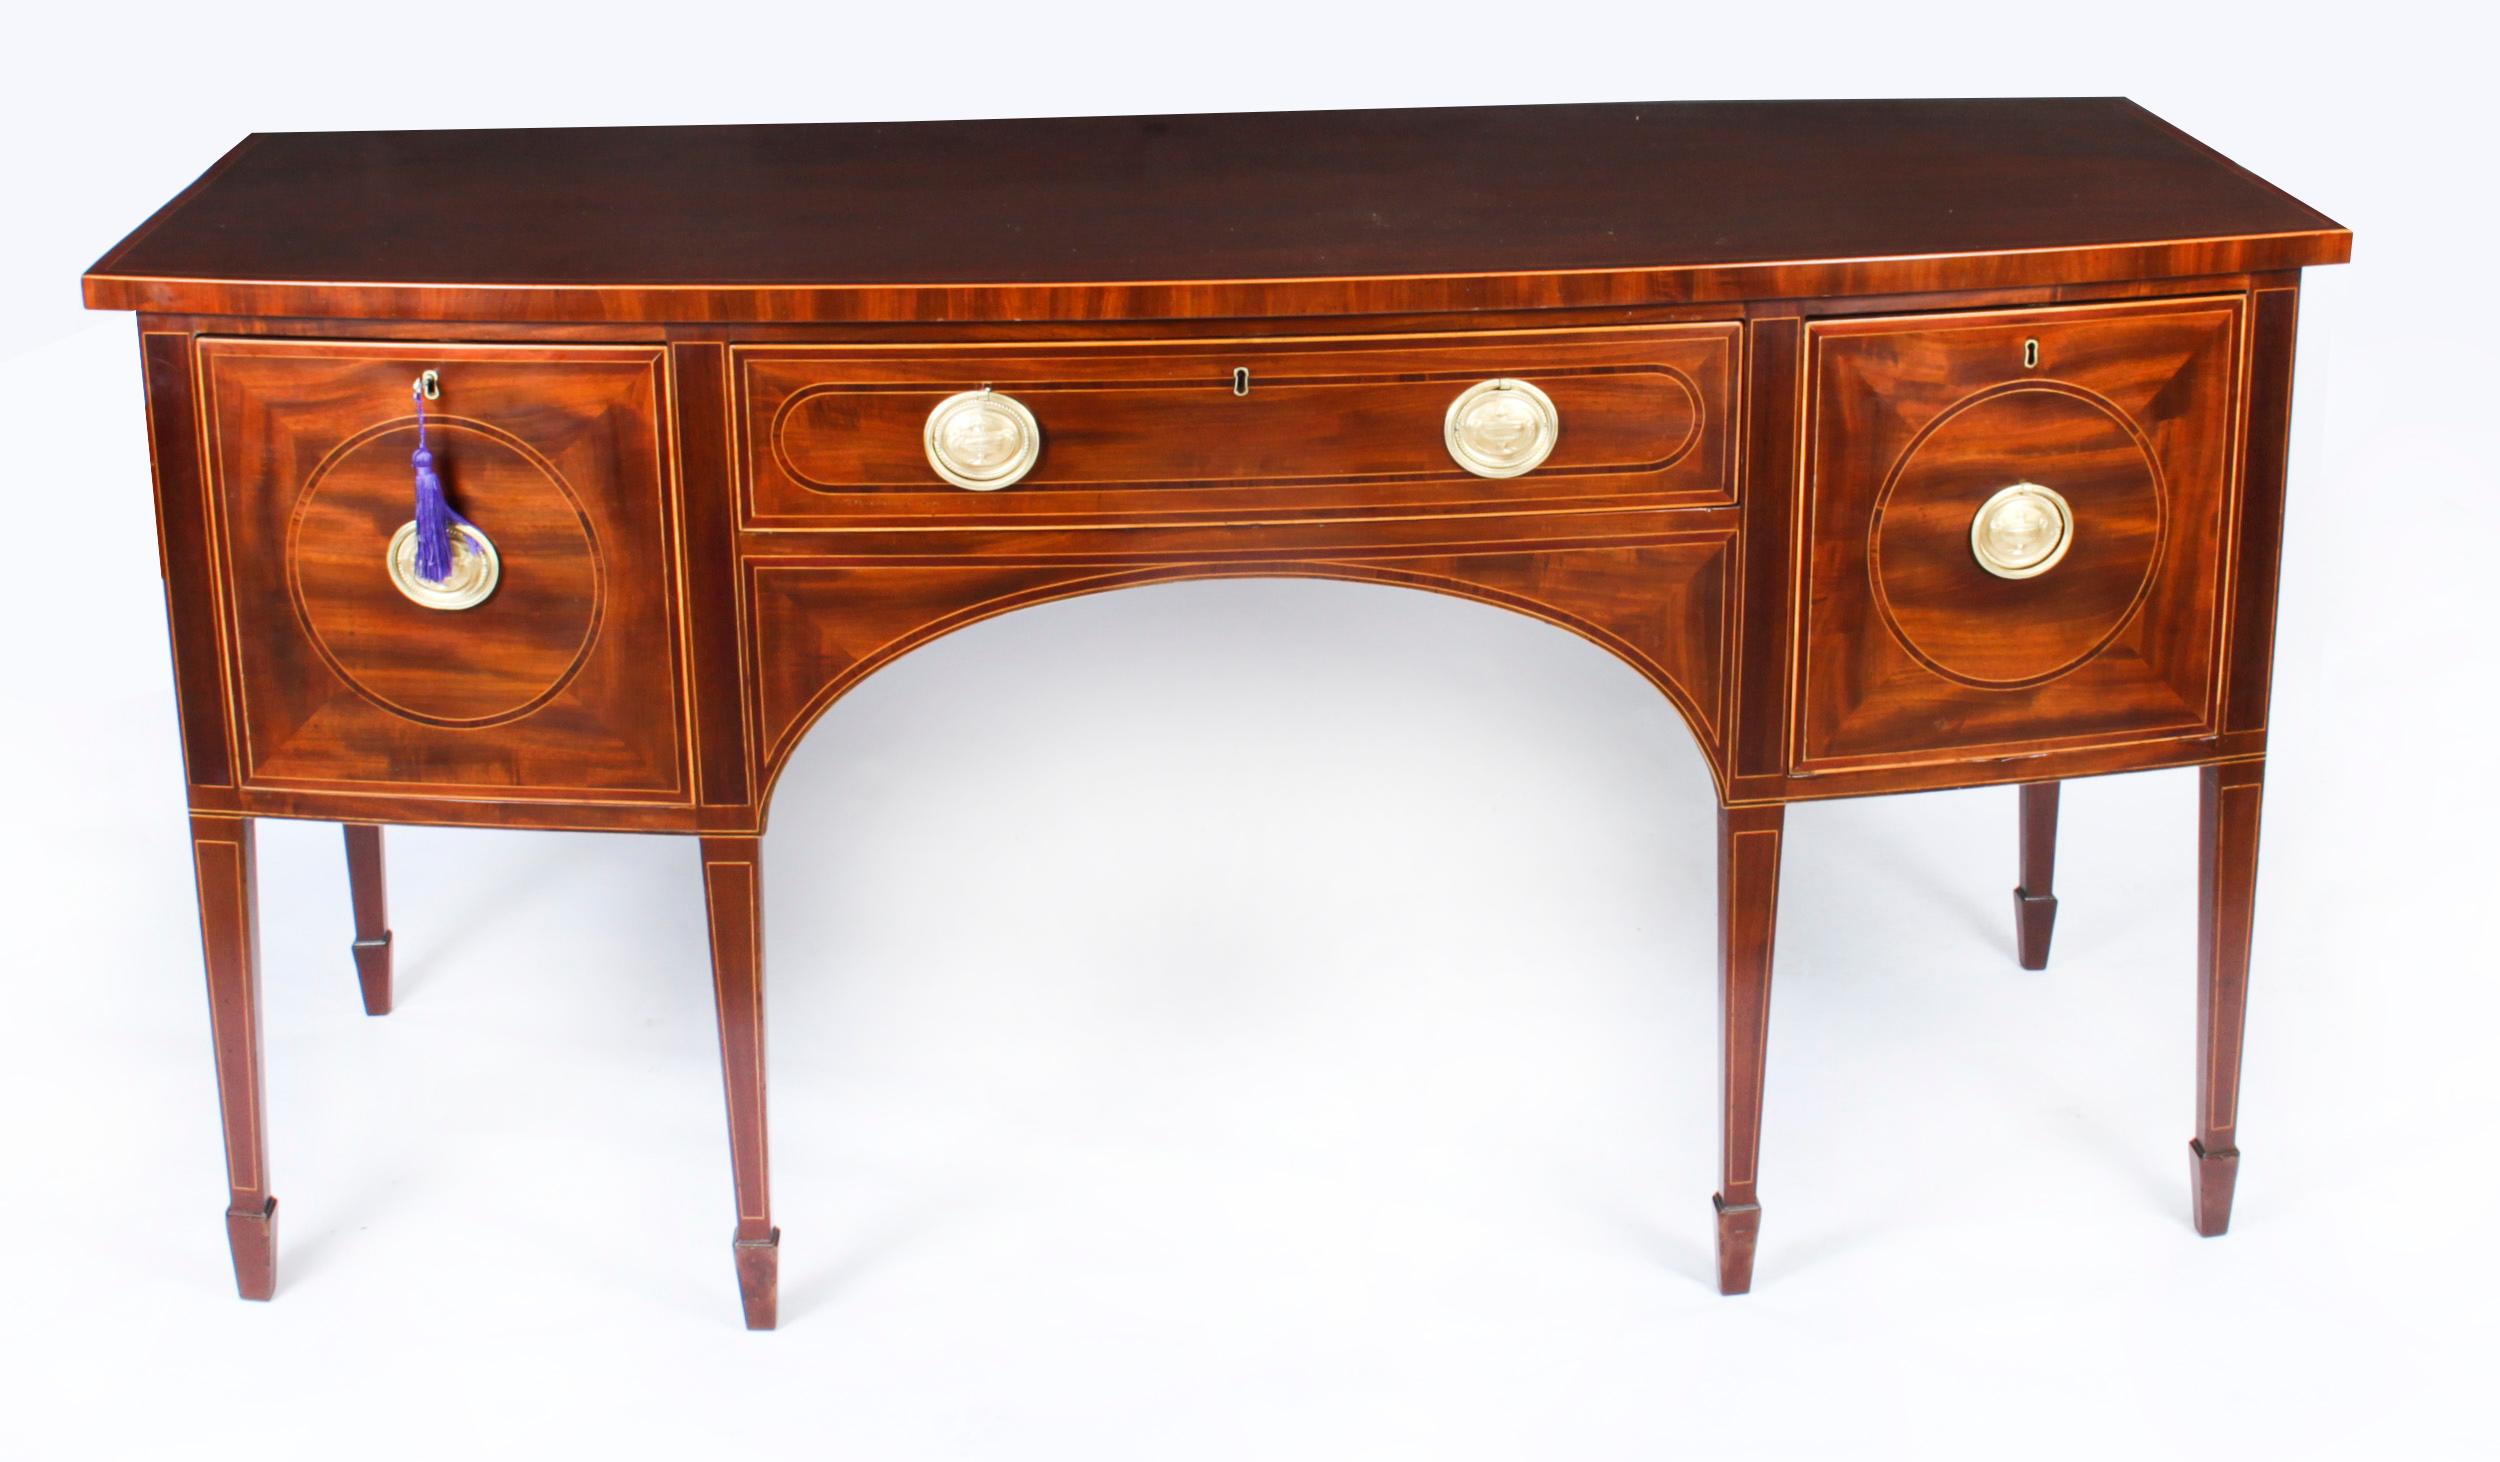 This is a superb antique Scottish flame mahogany and inlaid bowfront sideboard made in the reign of George III, circa 1790 in date.
 
The splendid shaped top is above a central frieze drawer flanked by cellarette drawers, all with their original